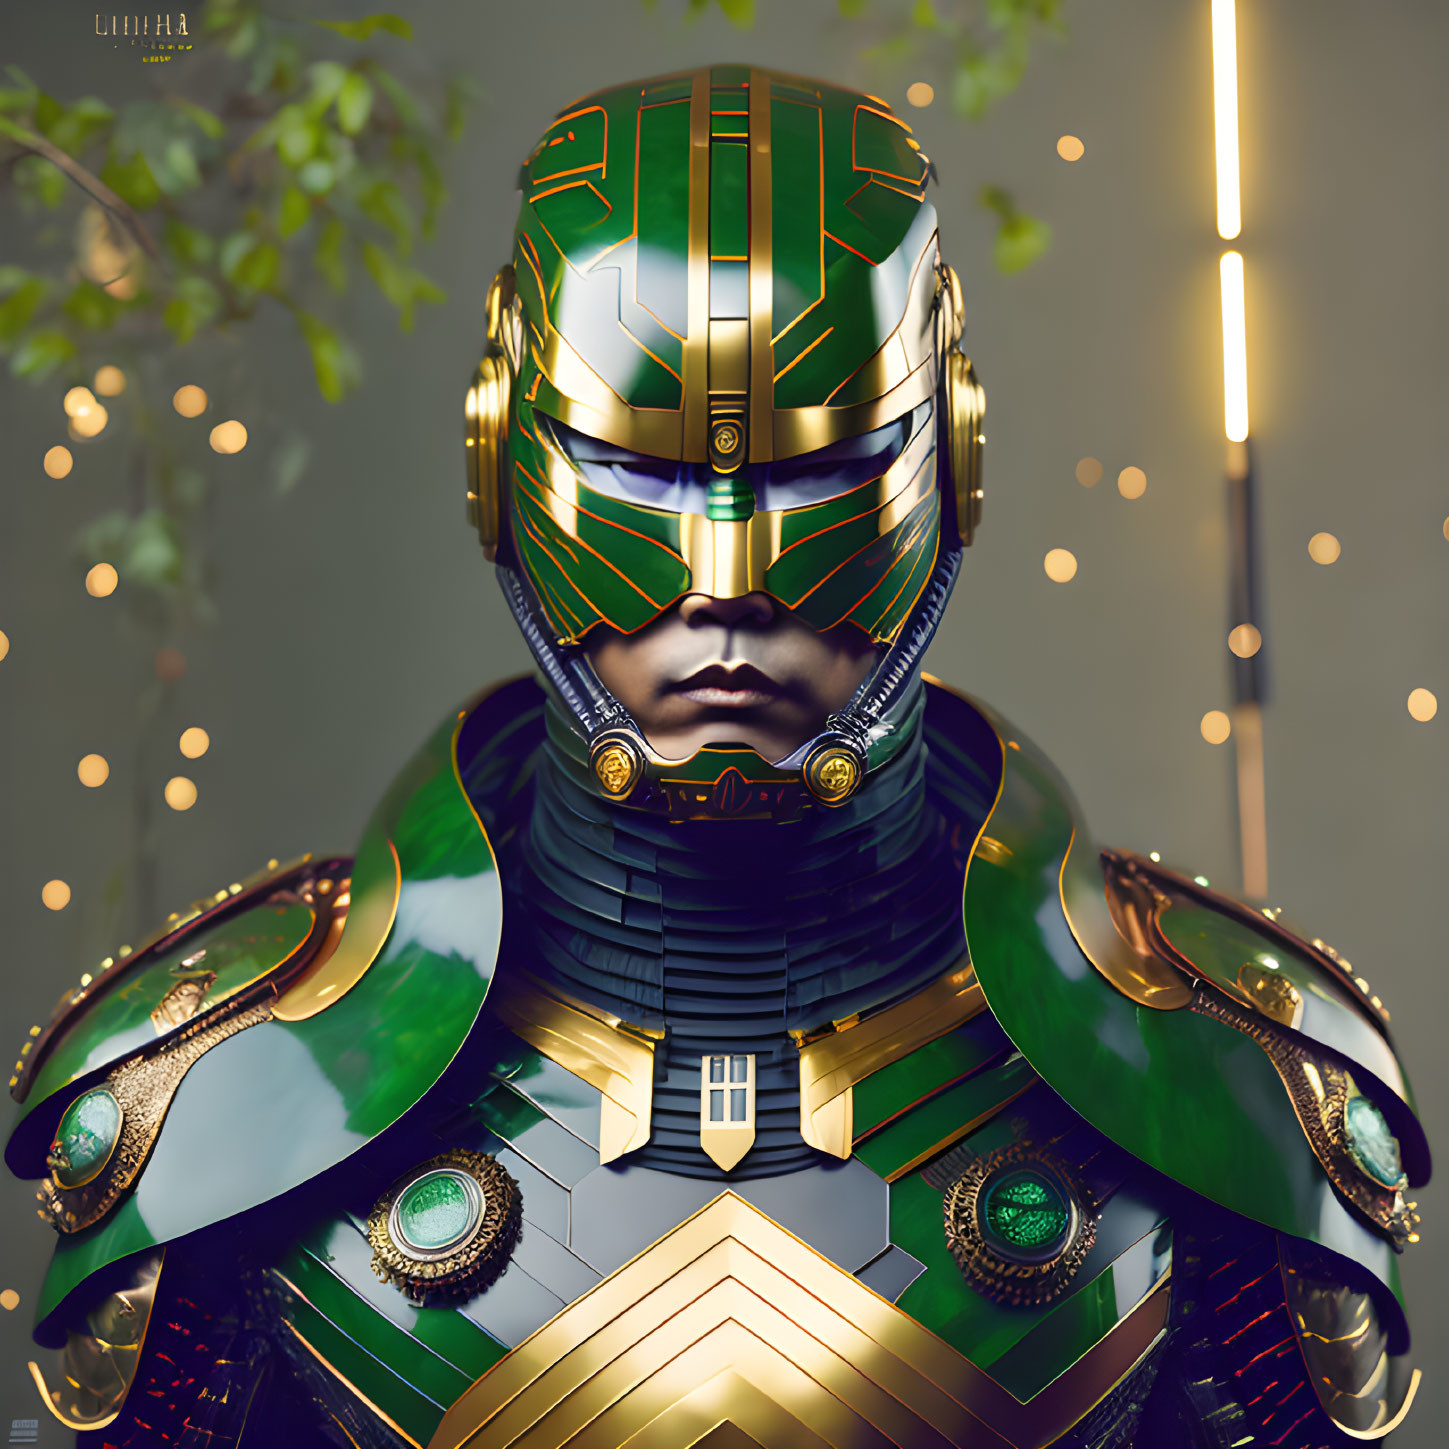 Detailed Green and Gold Futuristic Warrior with Ambient Golden Lights